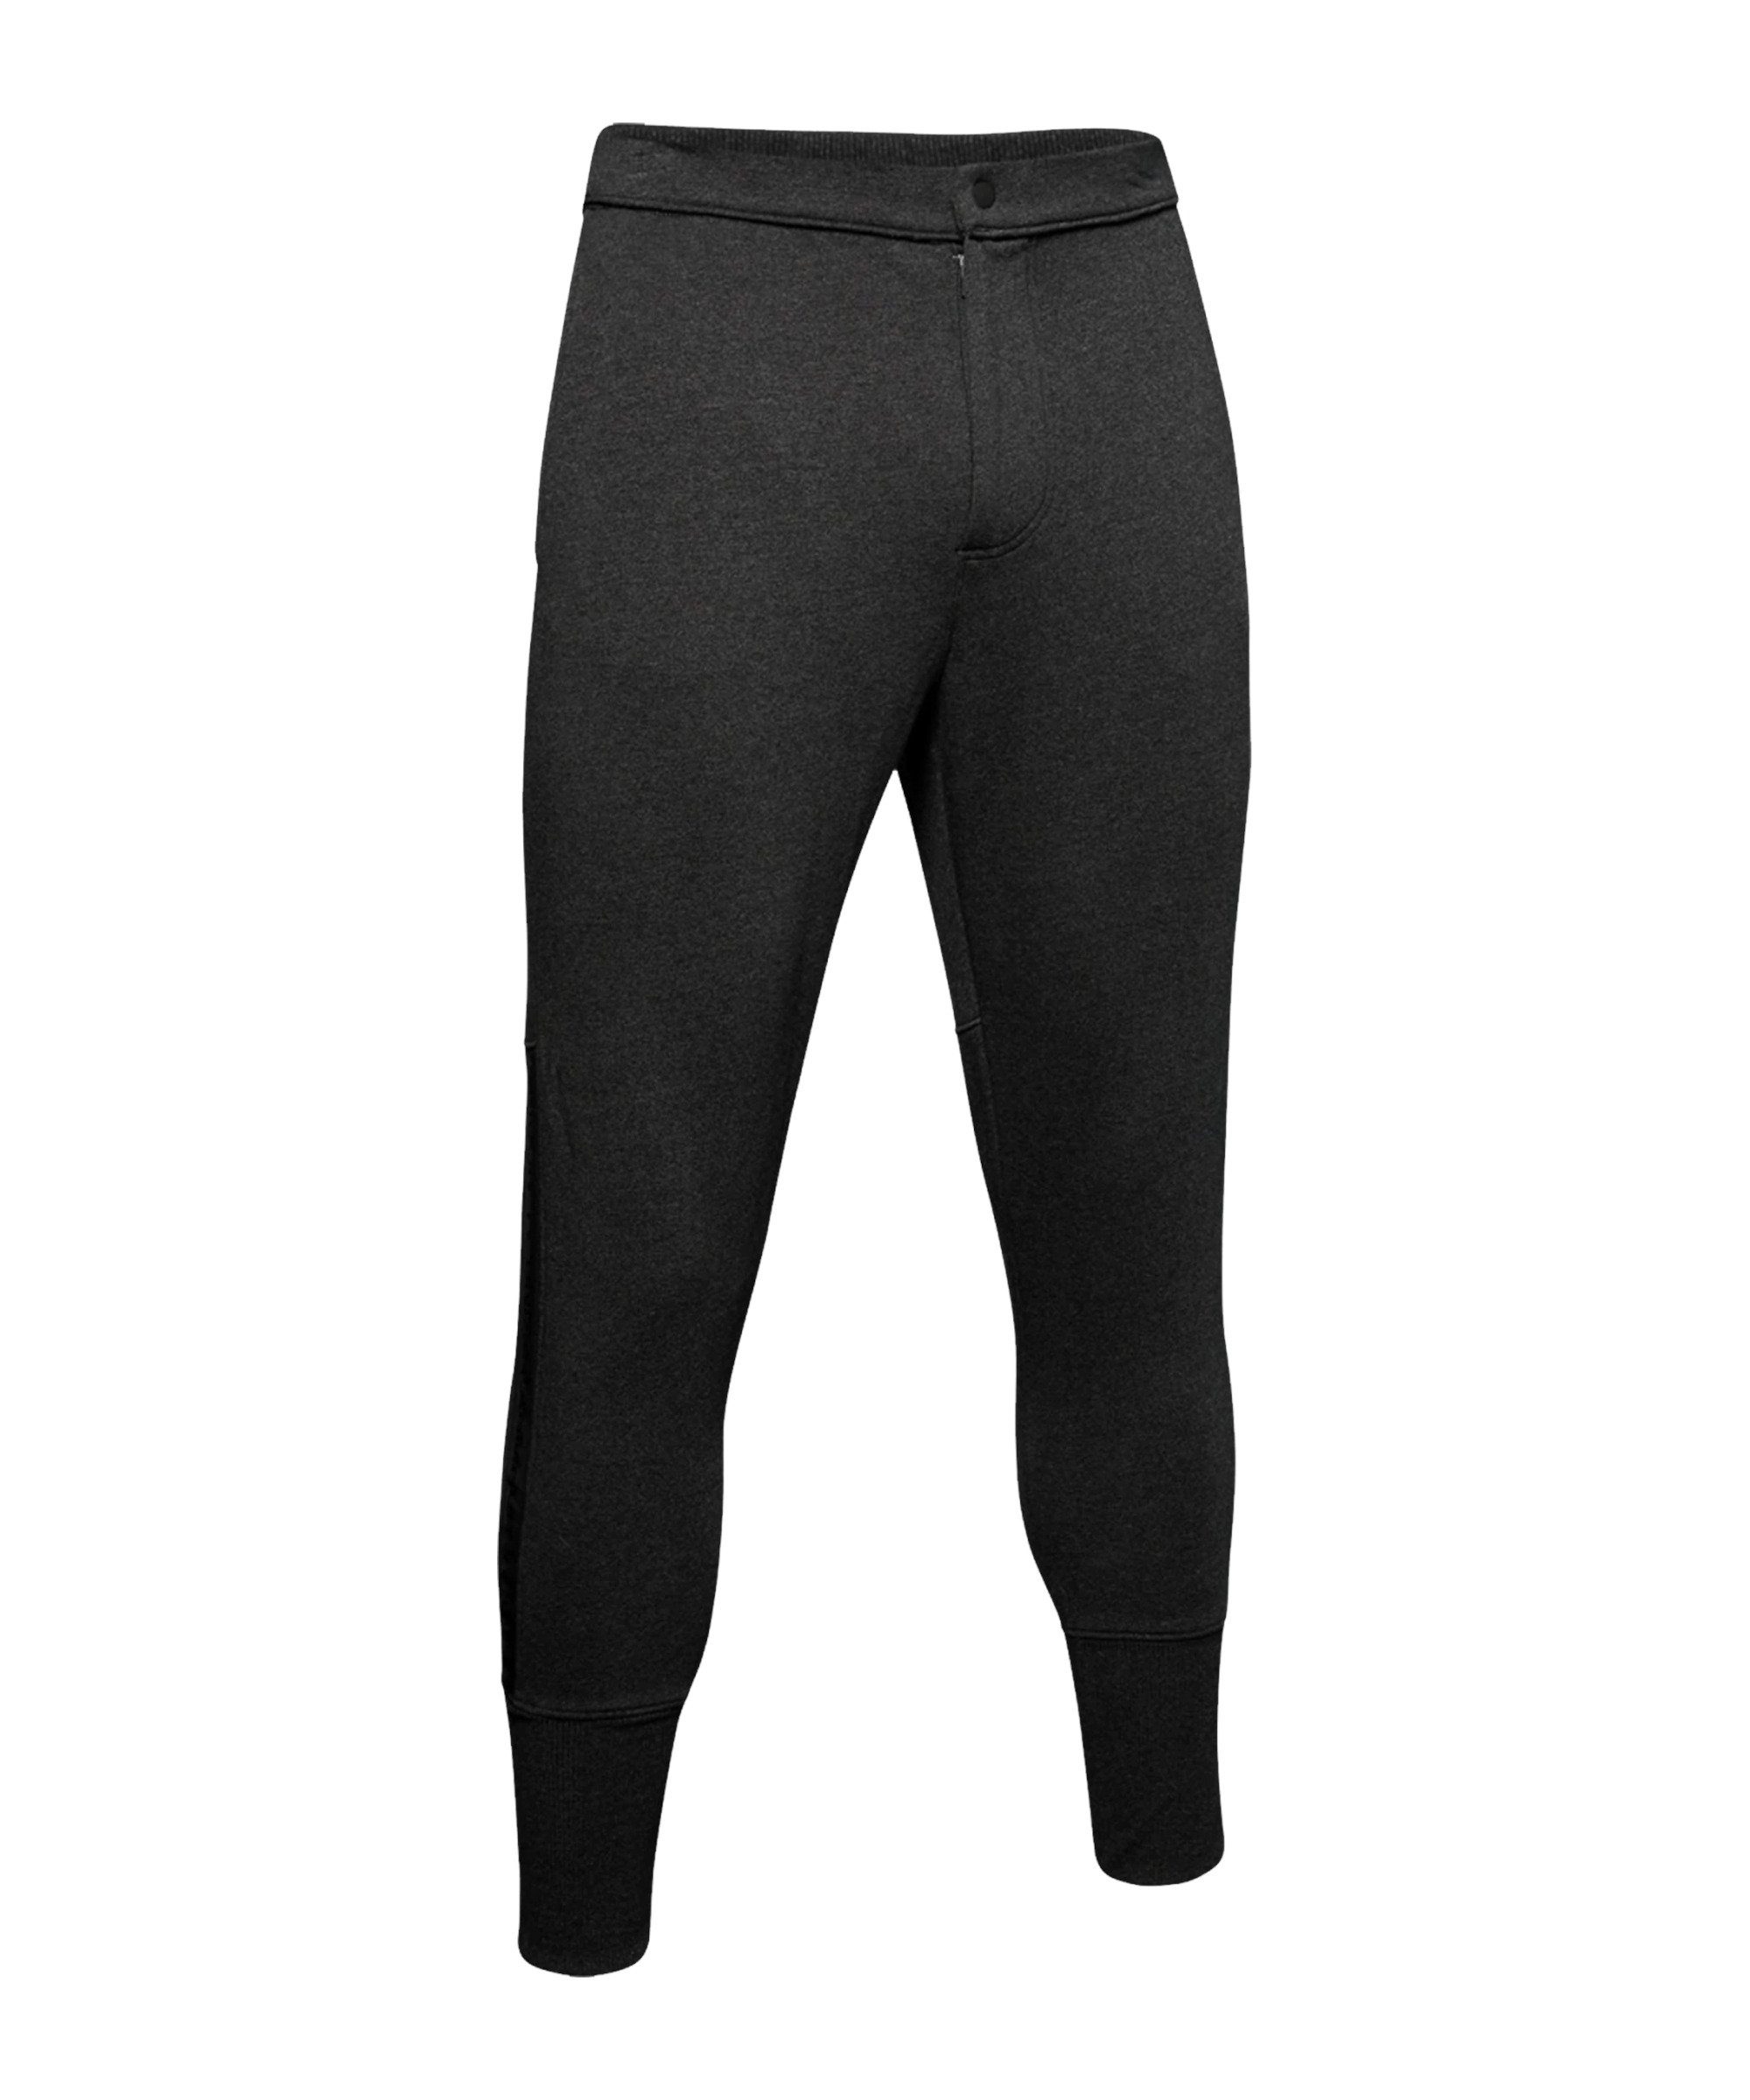 Under Armour® Sporthose »Accelerate Off-Pitch Hose« online kaufen | OTTO